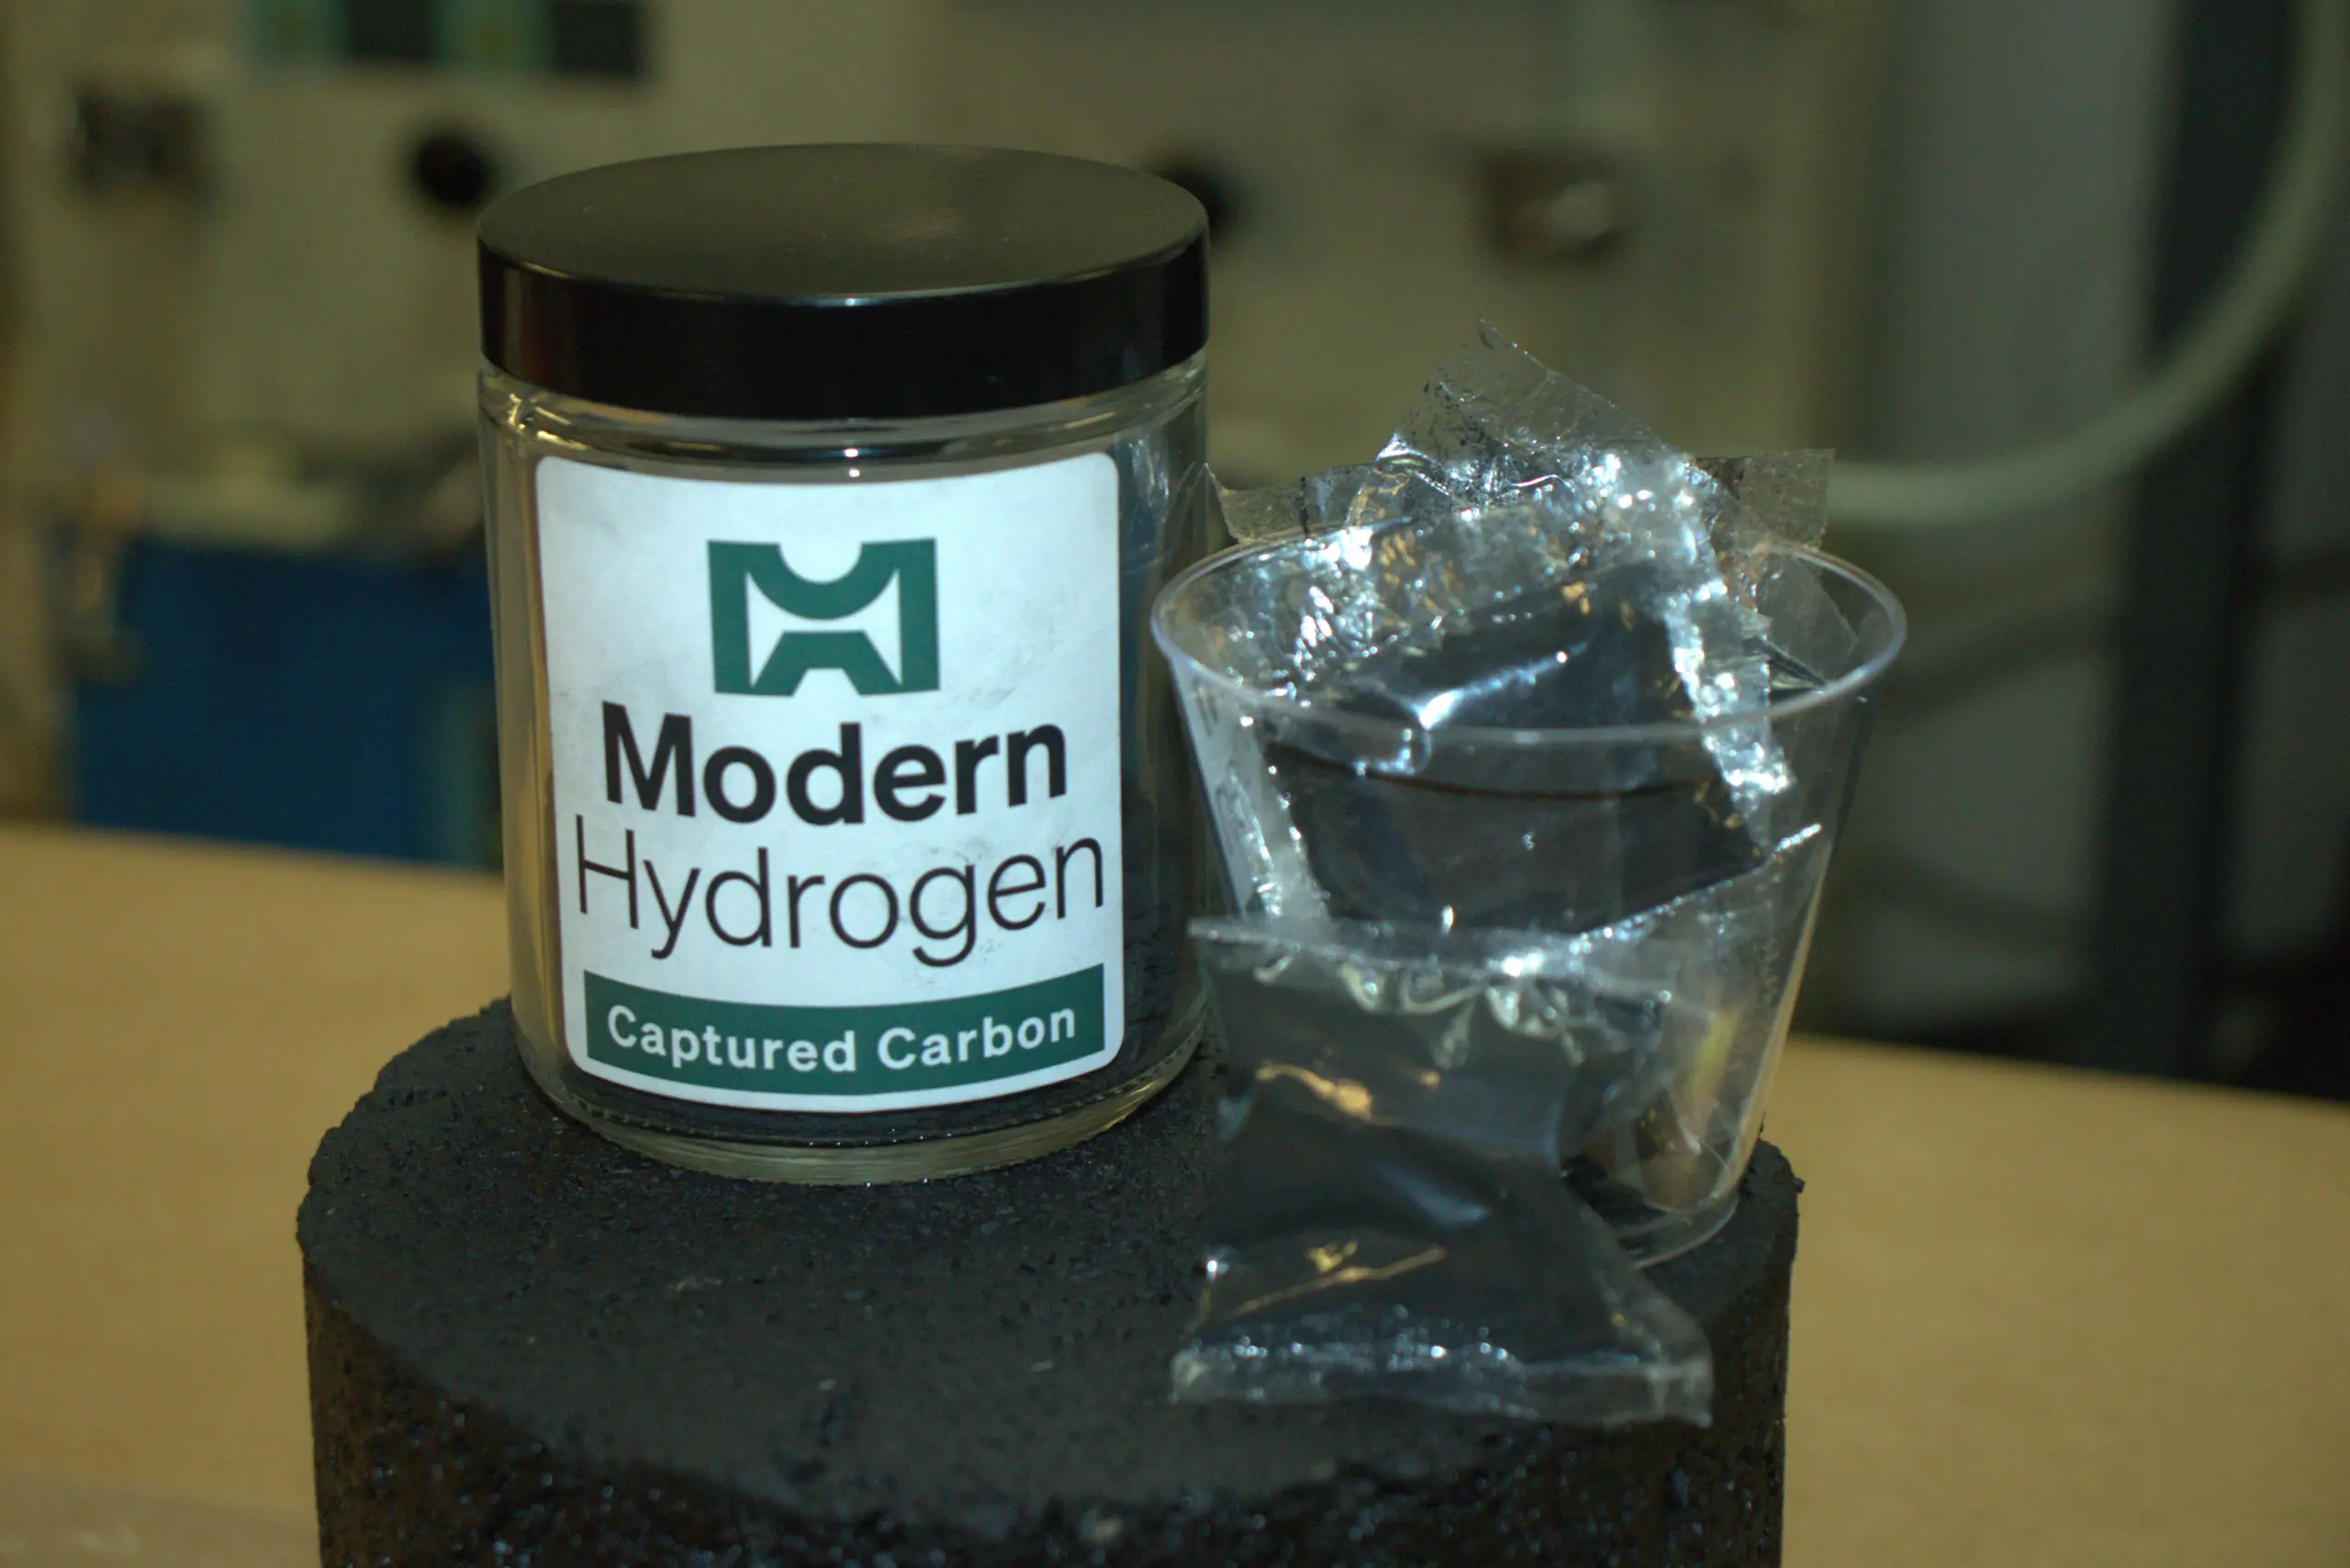 cannister of modern hydrogen carbon black with modern hydrogen label and logo on front